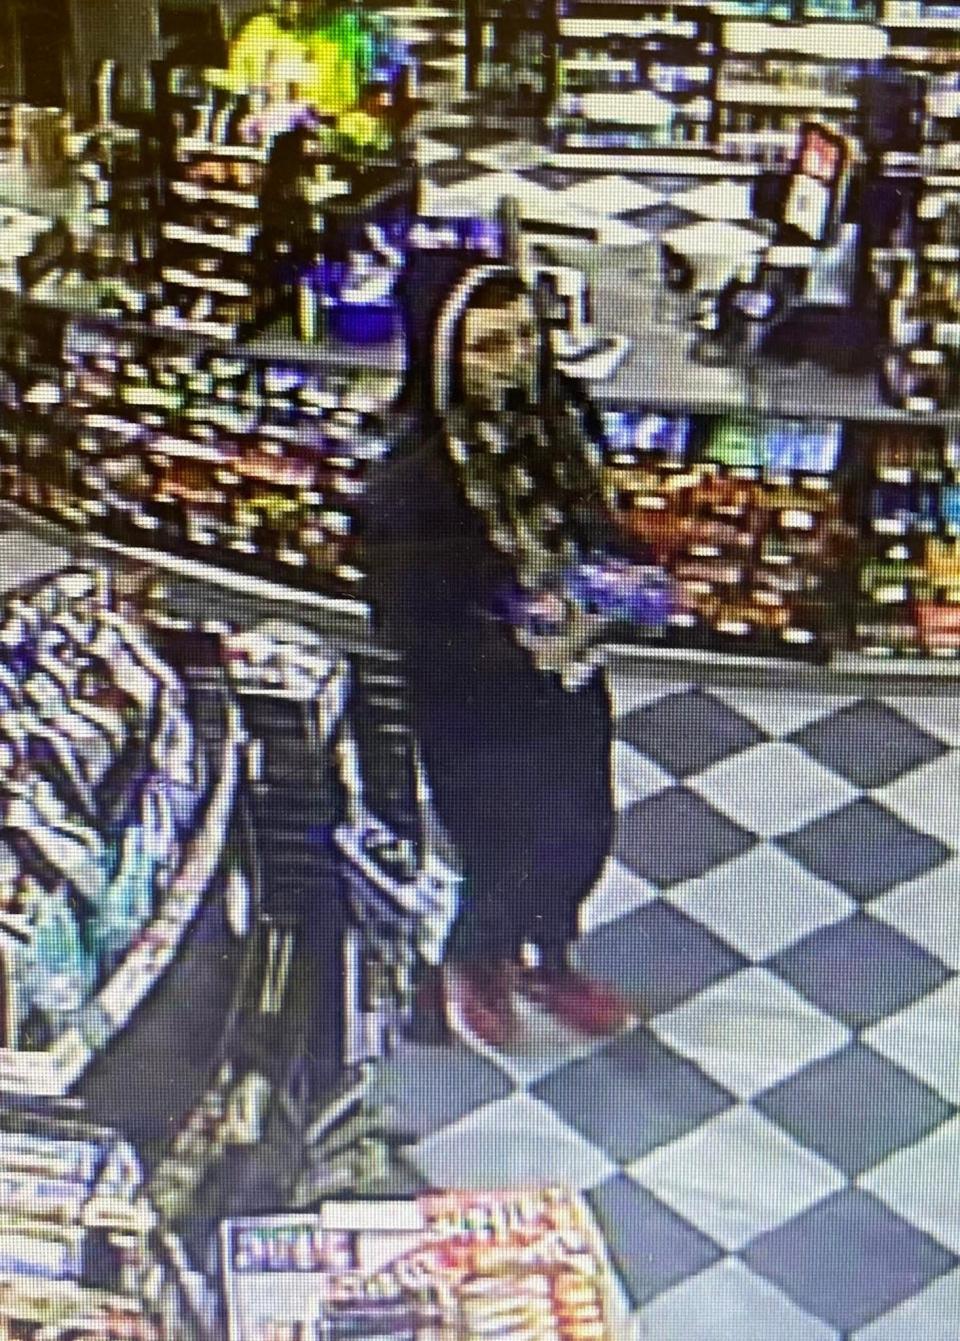 Hampton police have released a surveillance photo of a &#x00201c;person of interest&#x00201d; in connection to the rash of burglaries in Hampton.